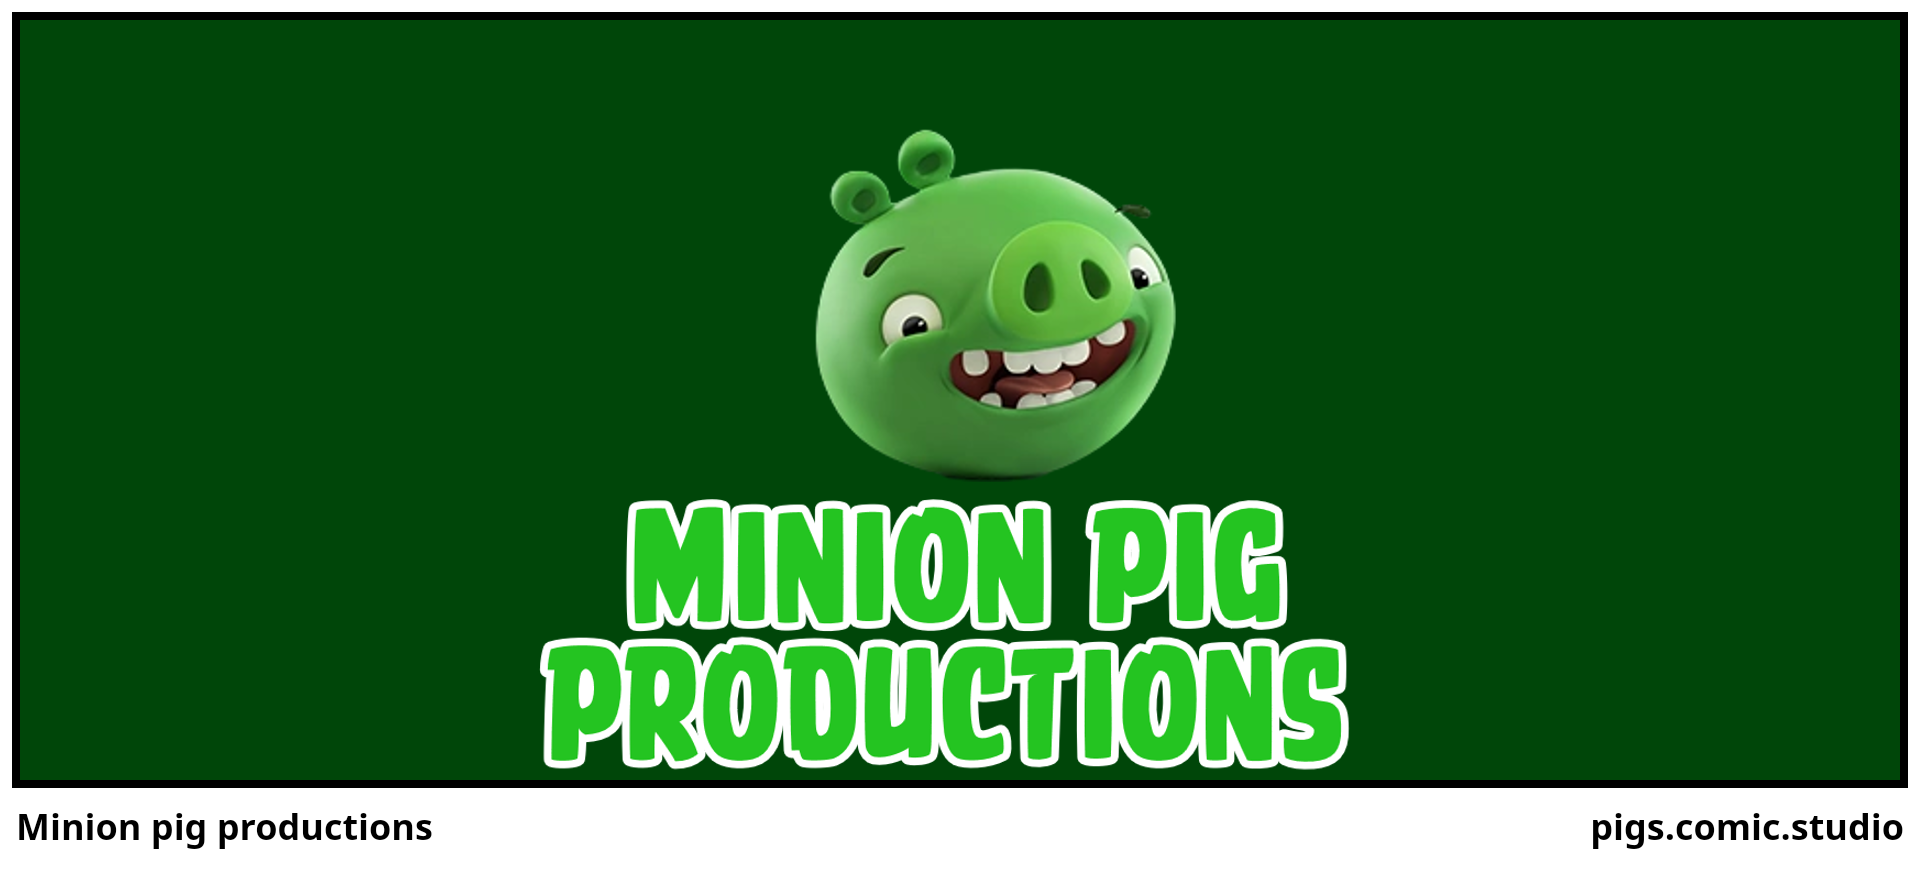 Minion pig productions